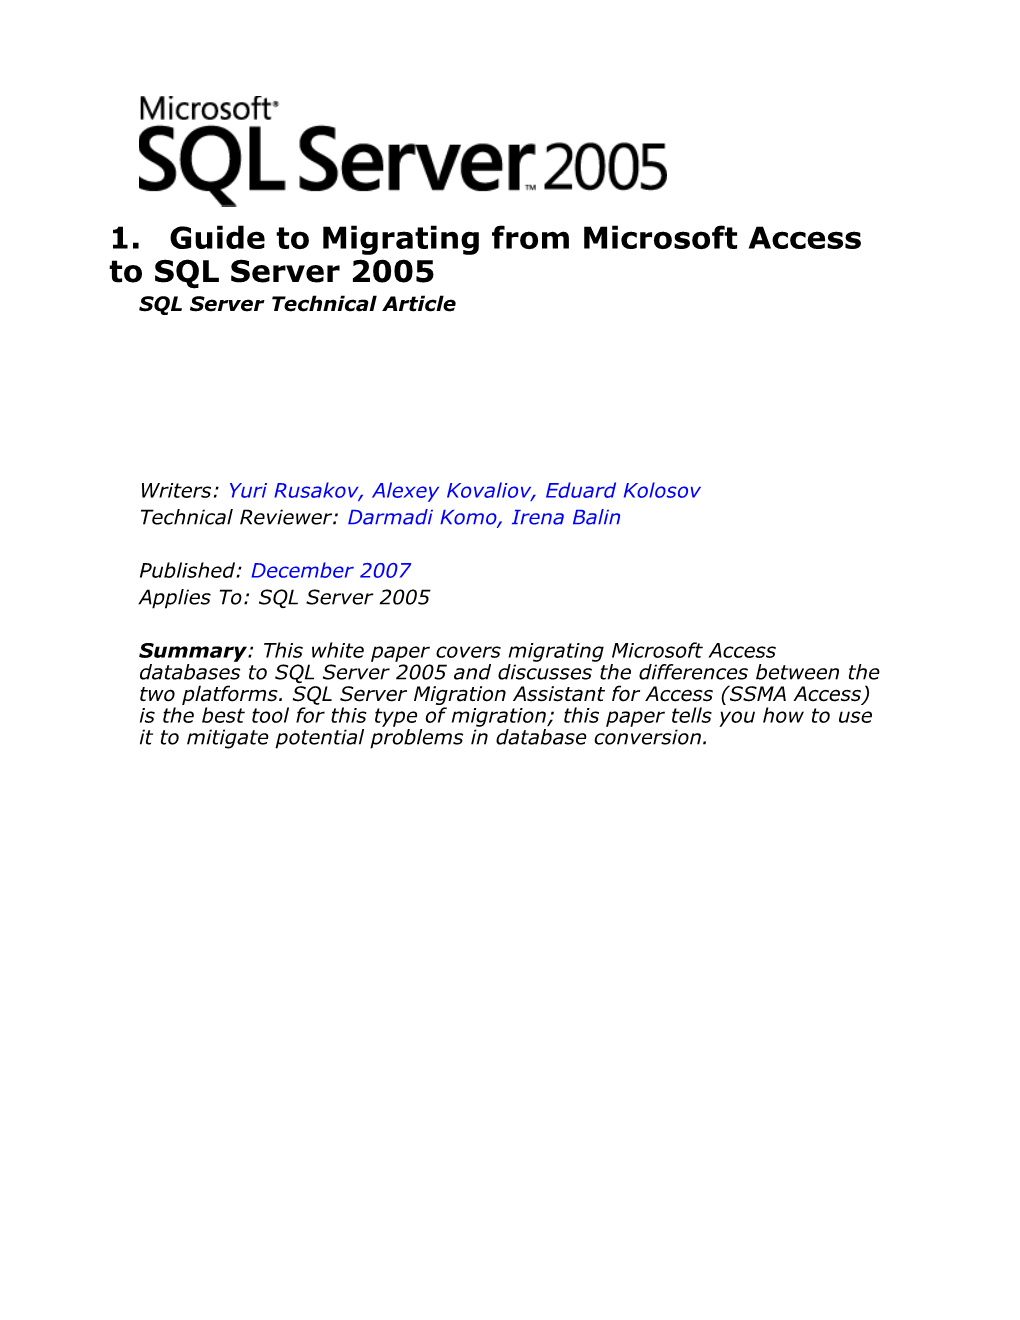 Guide to Migrating from Sybase to SQL Server 2005